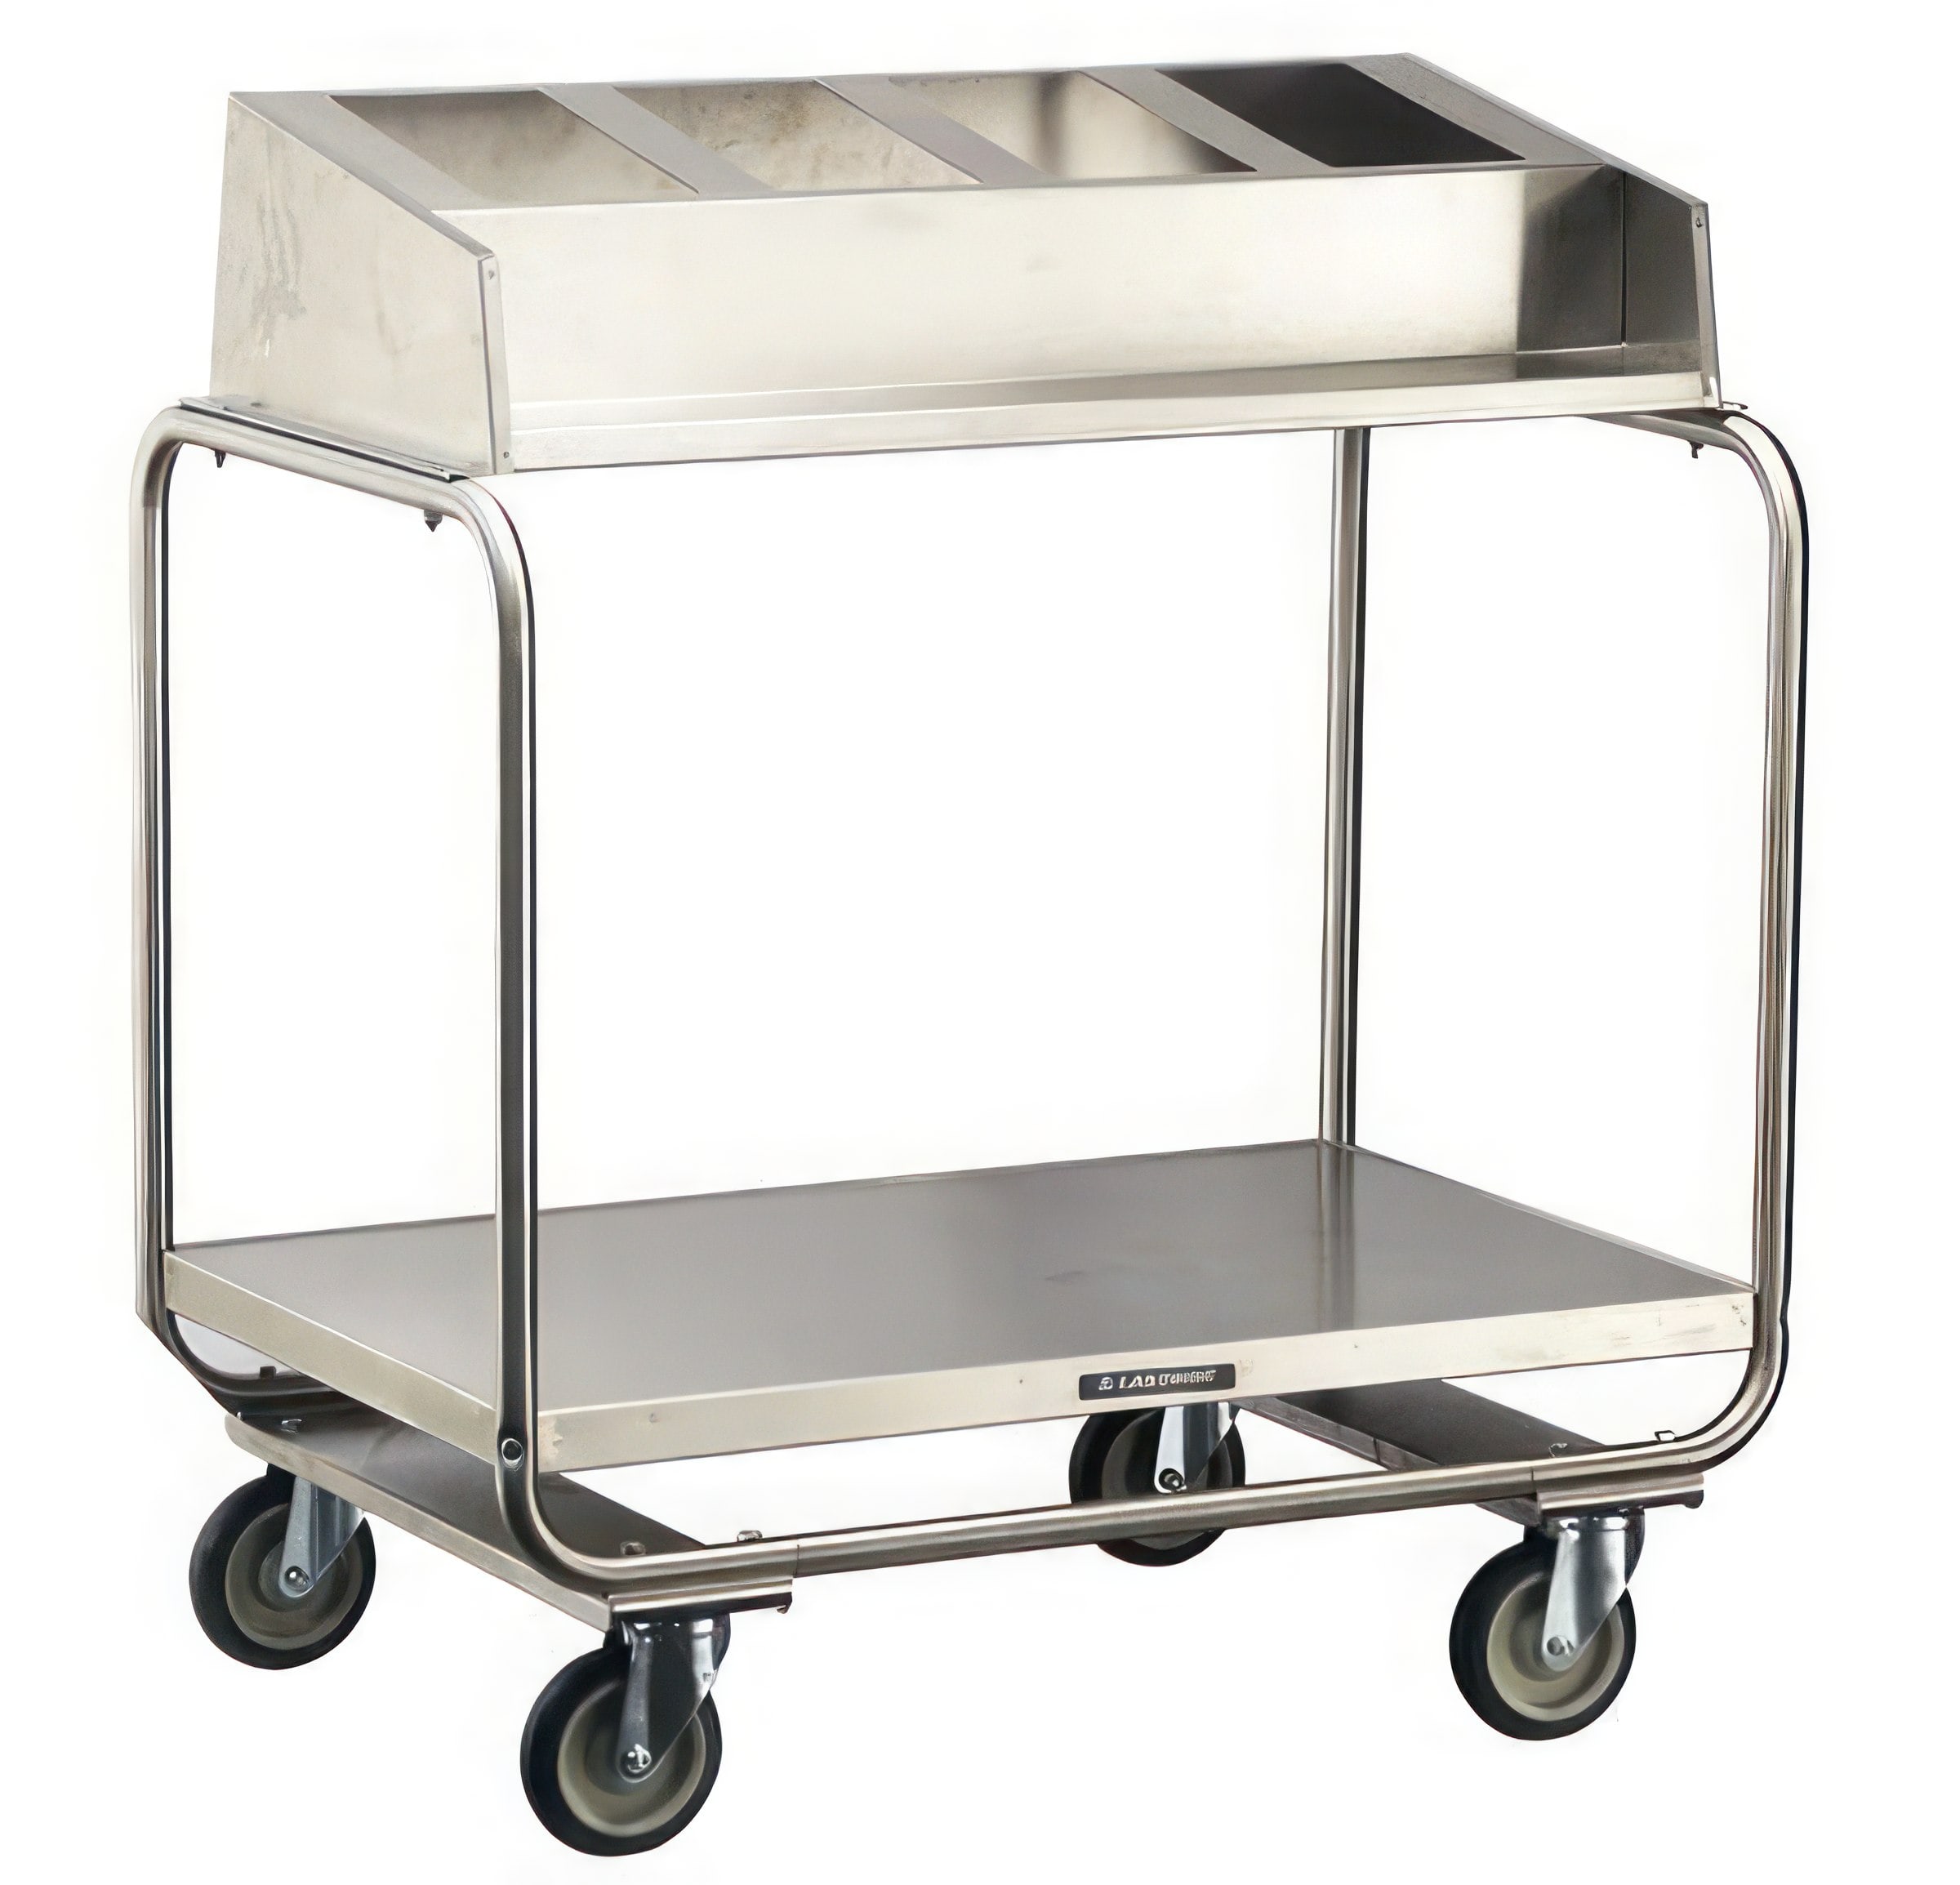 Channel 468S 40 Tray Bottom Load Double Stainless Steel Cafeteria Tray Rack  - Assembled